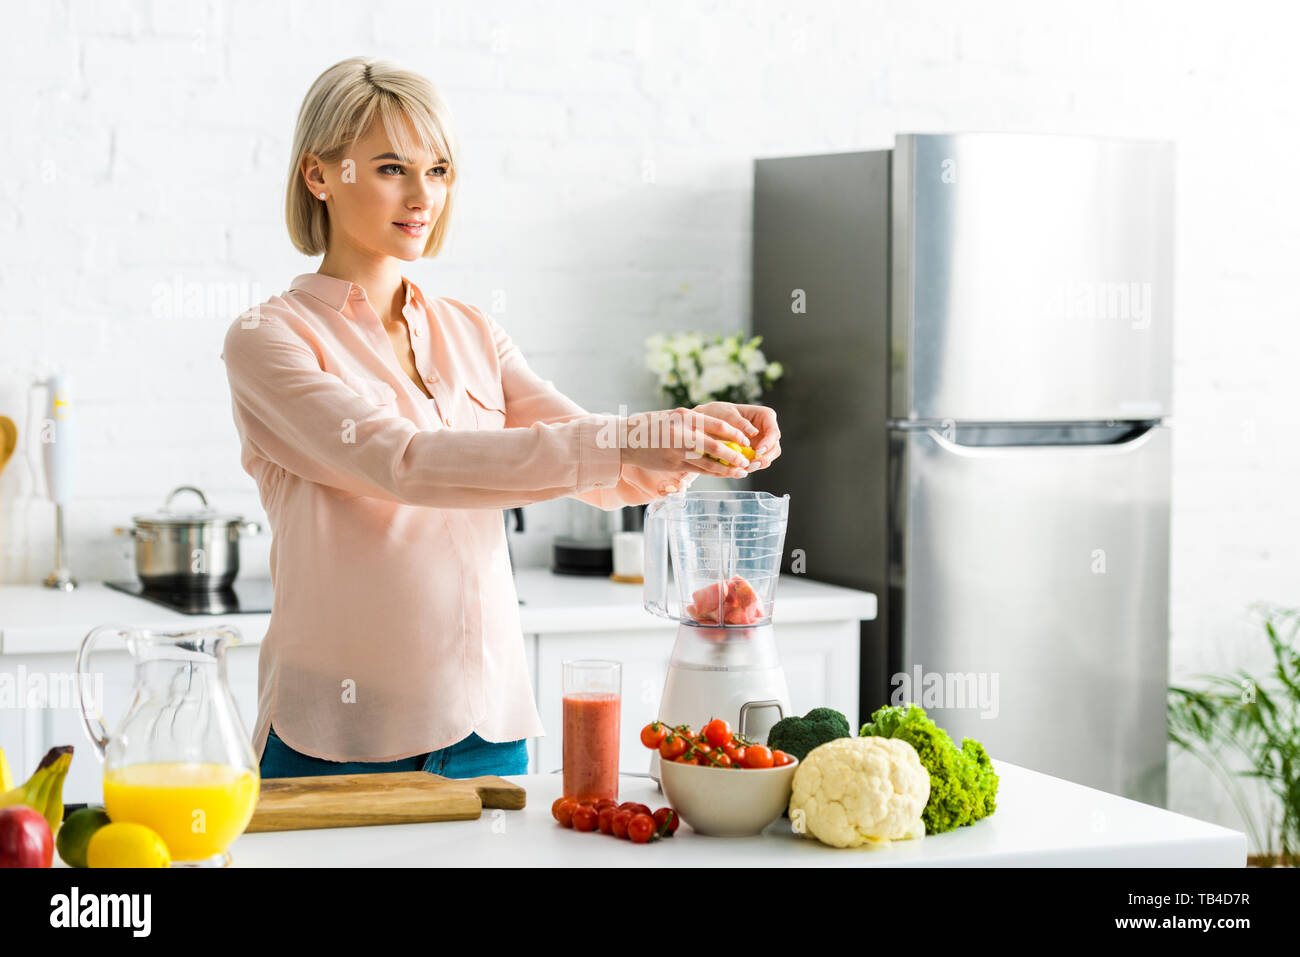 blonde pregnant young woman preparing food in kitchen Stock Photo